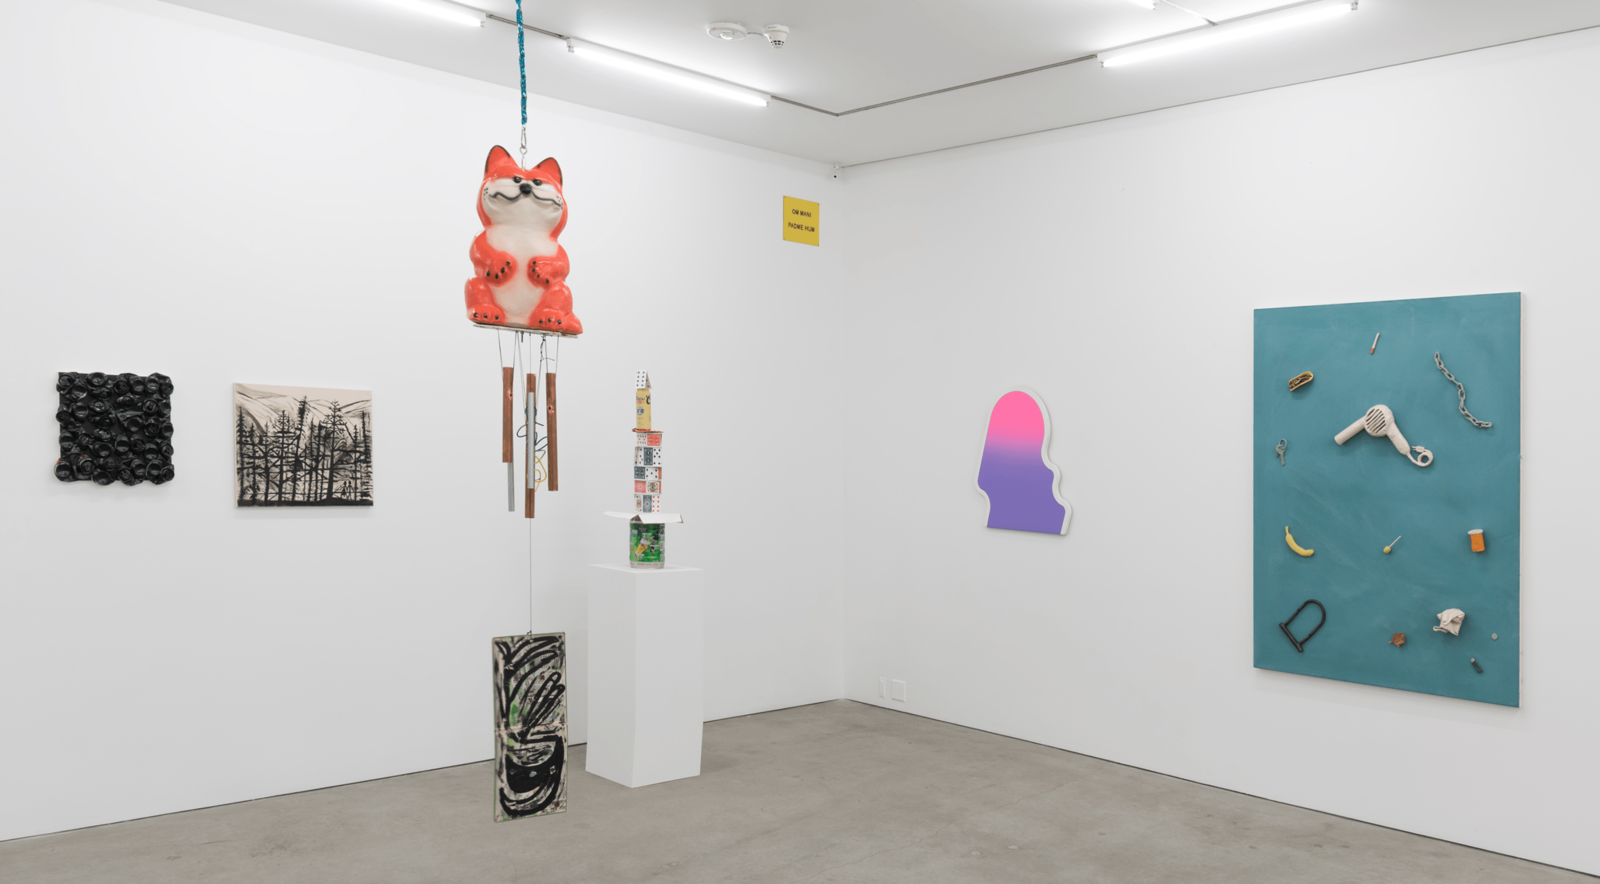 Edited burnt. group show curated by leo fitzpatrick. marlborough contemporary new york installation view 10